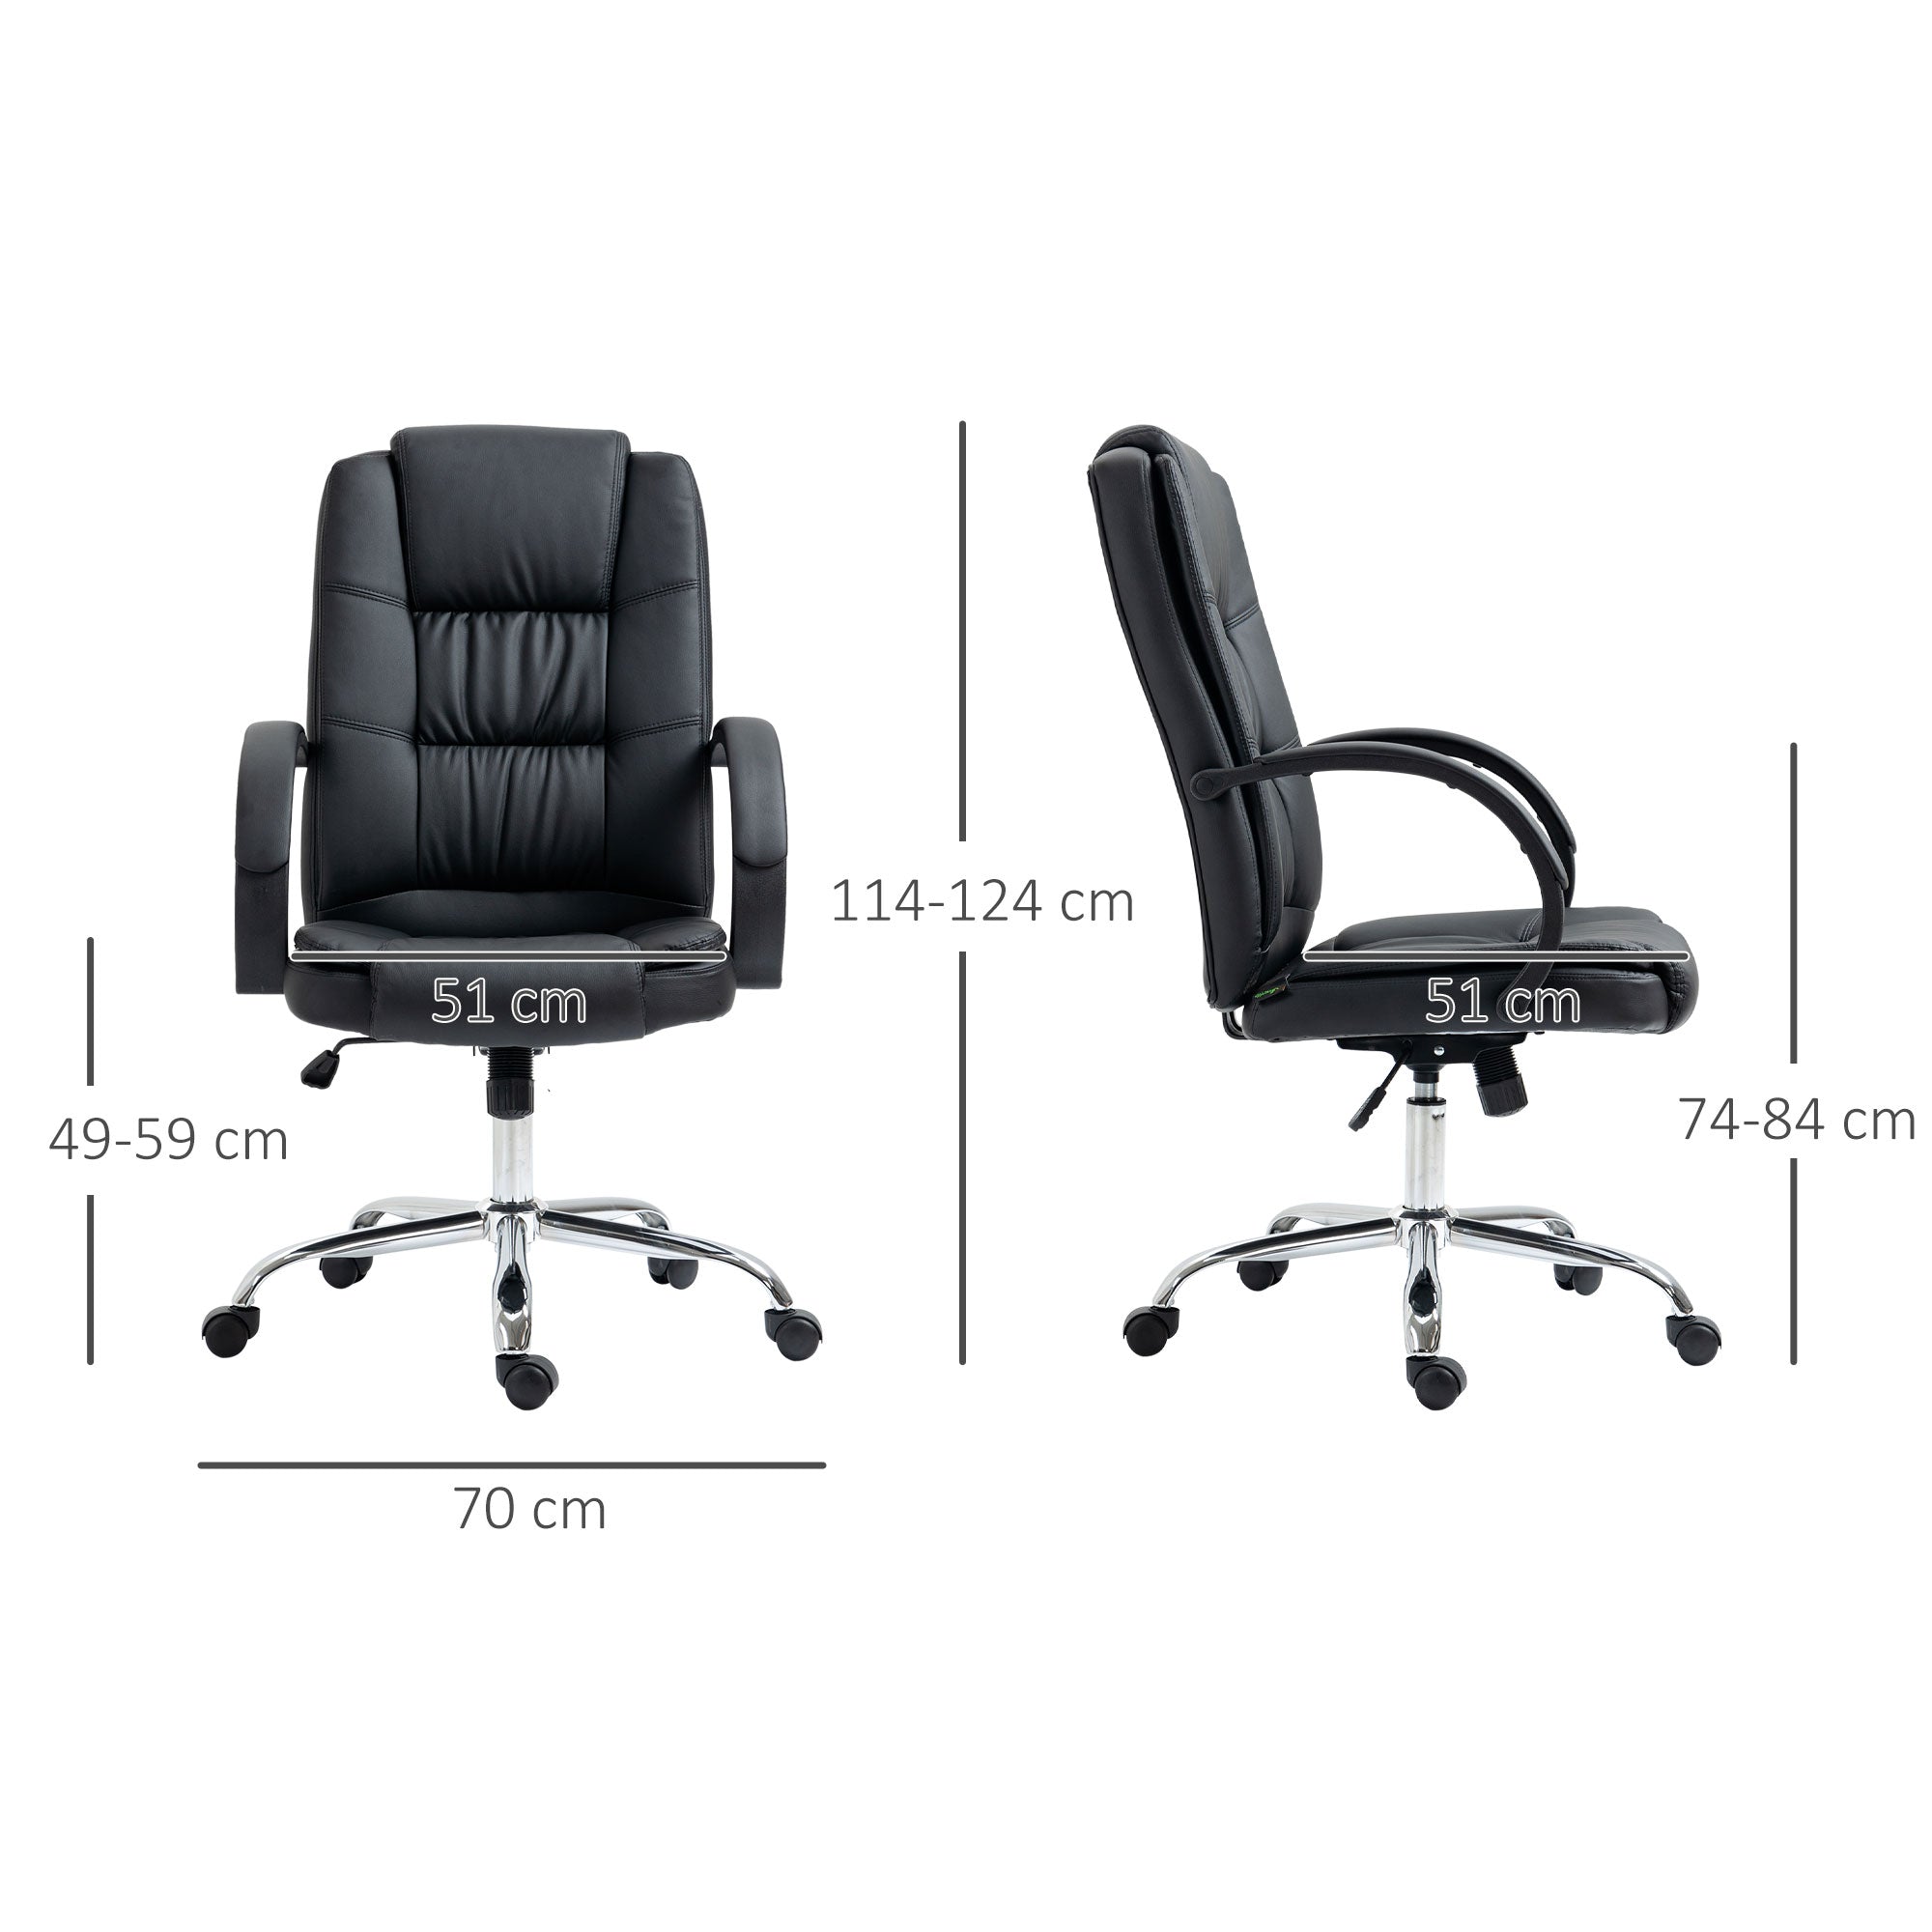 High Back Swivel Chair, PU Leather Executive Office Chair with Padded Armrests, Adjustable Height, Tilt Function, Black-2